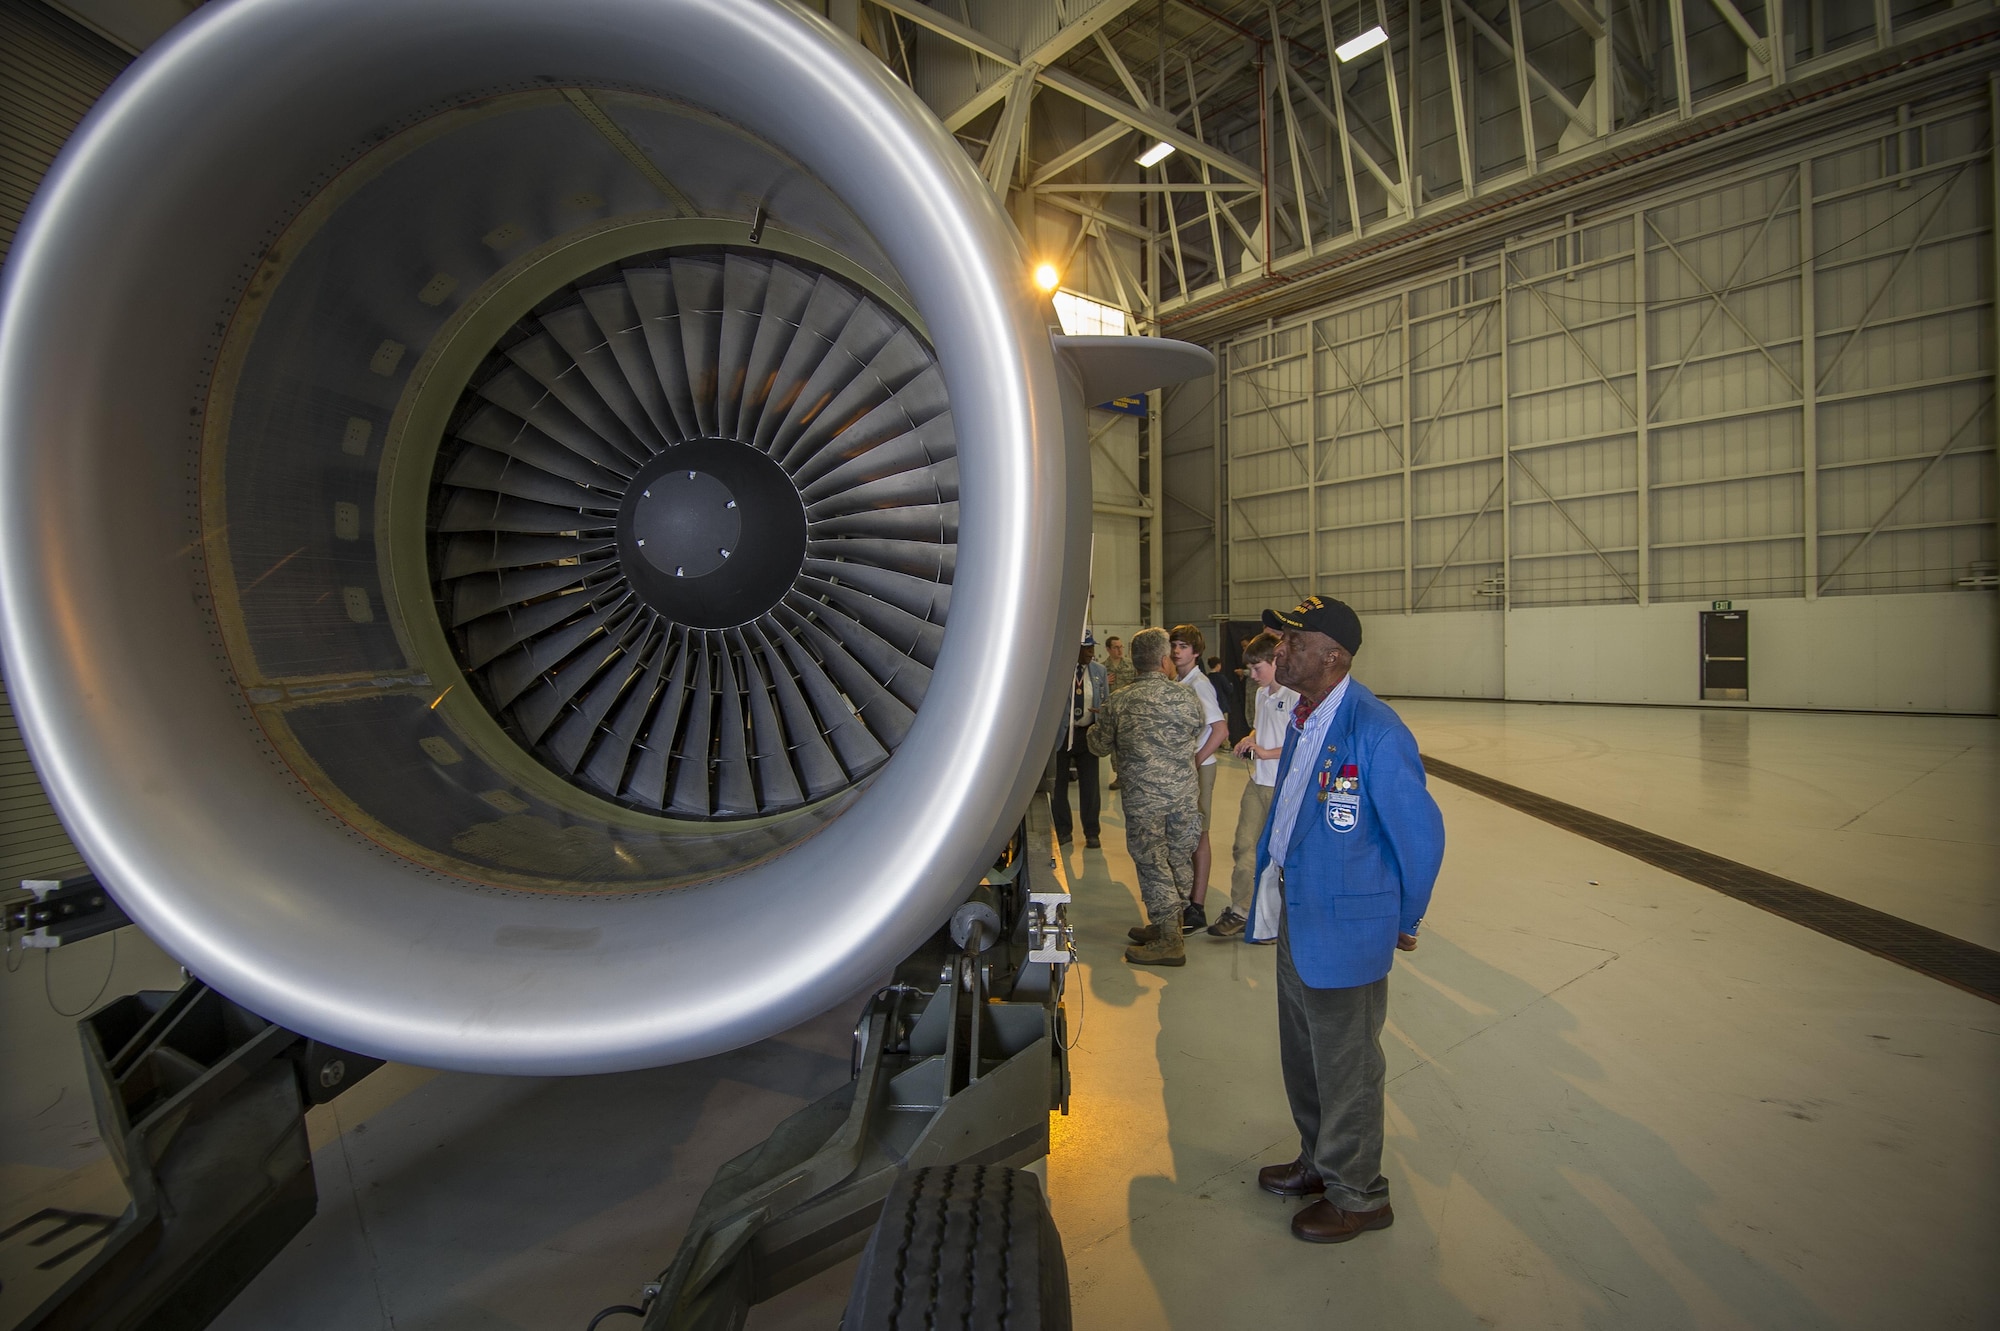 (Ret.) Lt. Col. Enoch “Woody” Woodhouse observes the engine of a C-17 Globemaster III Feb. 23, 2017, during the Tuskegee Airmen Career Day at Joint Base Charleston, S.C. Woodhouse has worked as a trial lawyer in Boston for more than 40 years, and is a highly decorated combat veteran. In 2007, he received the Medal of Honor, along with other Tuskegee Airmen, by President George W. Bush for facing “two wars: one abroad and the other at home in terms of racial intolerance.” (U.S. Air Force photo by Senior Airman Tom Brading)